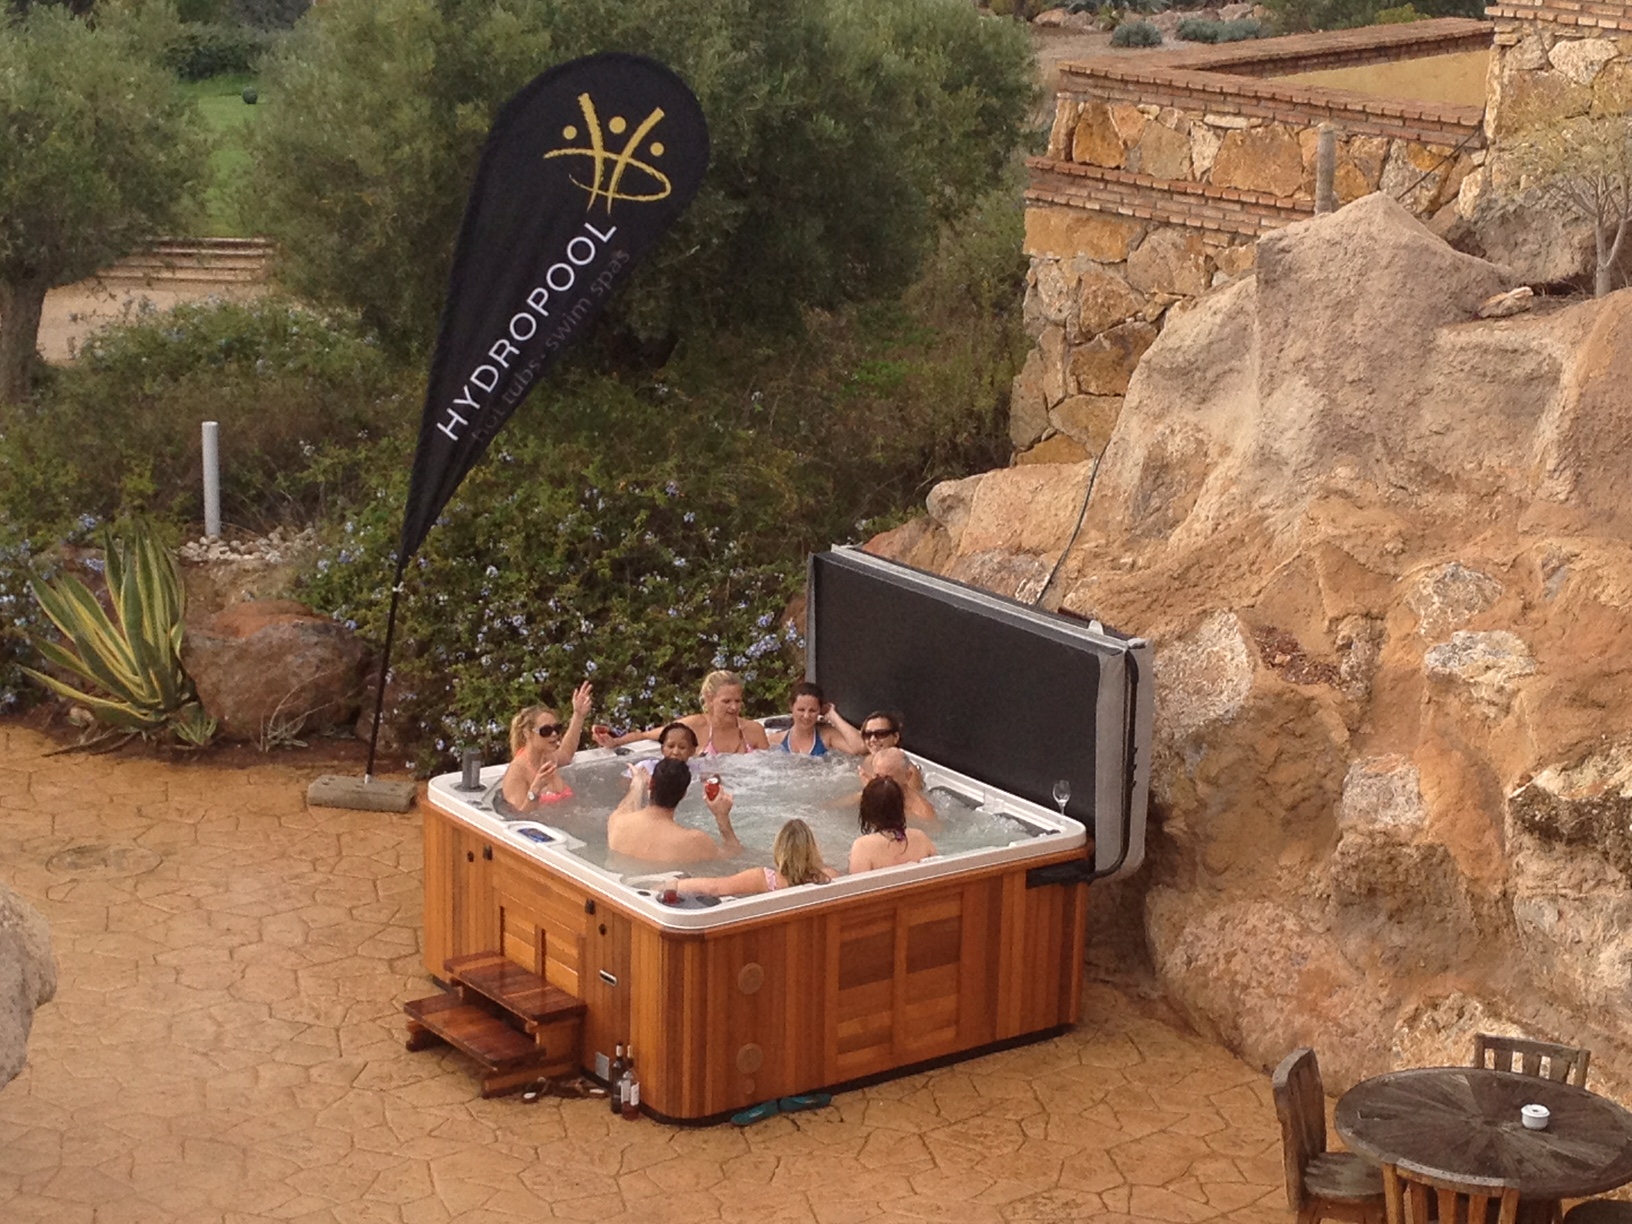 Hot Tubs provide the flexibility to locate them in most locations